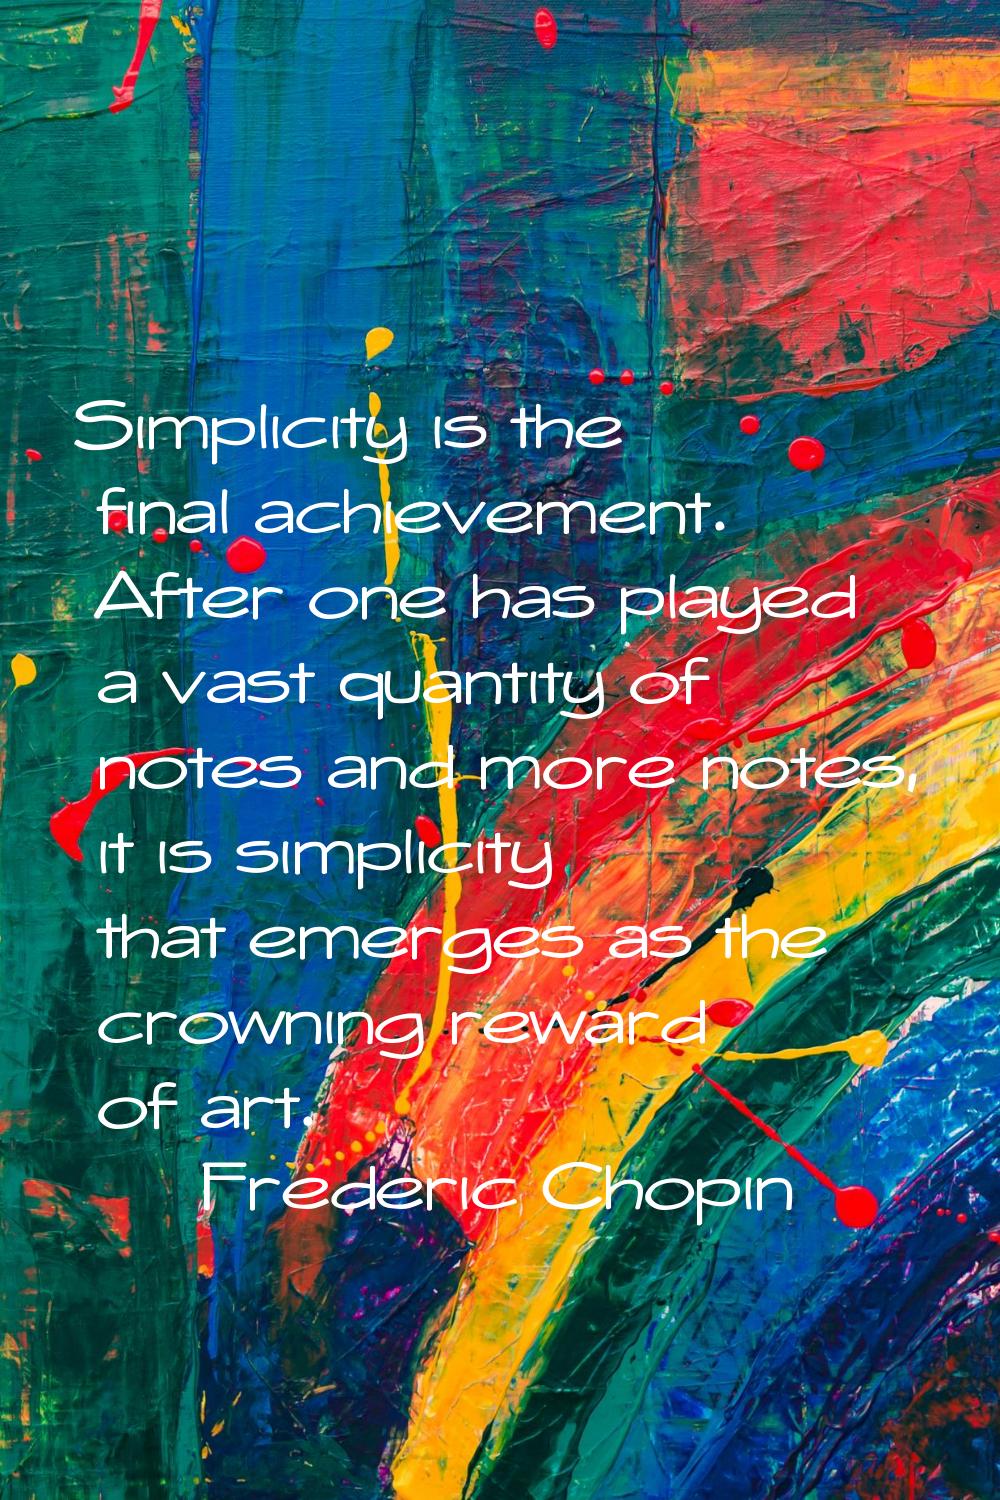 Simplicity is the final achievement. After one has played a vast quantity of notes and more notes, 